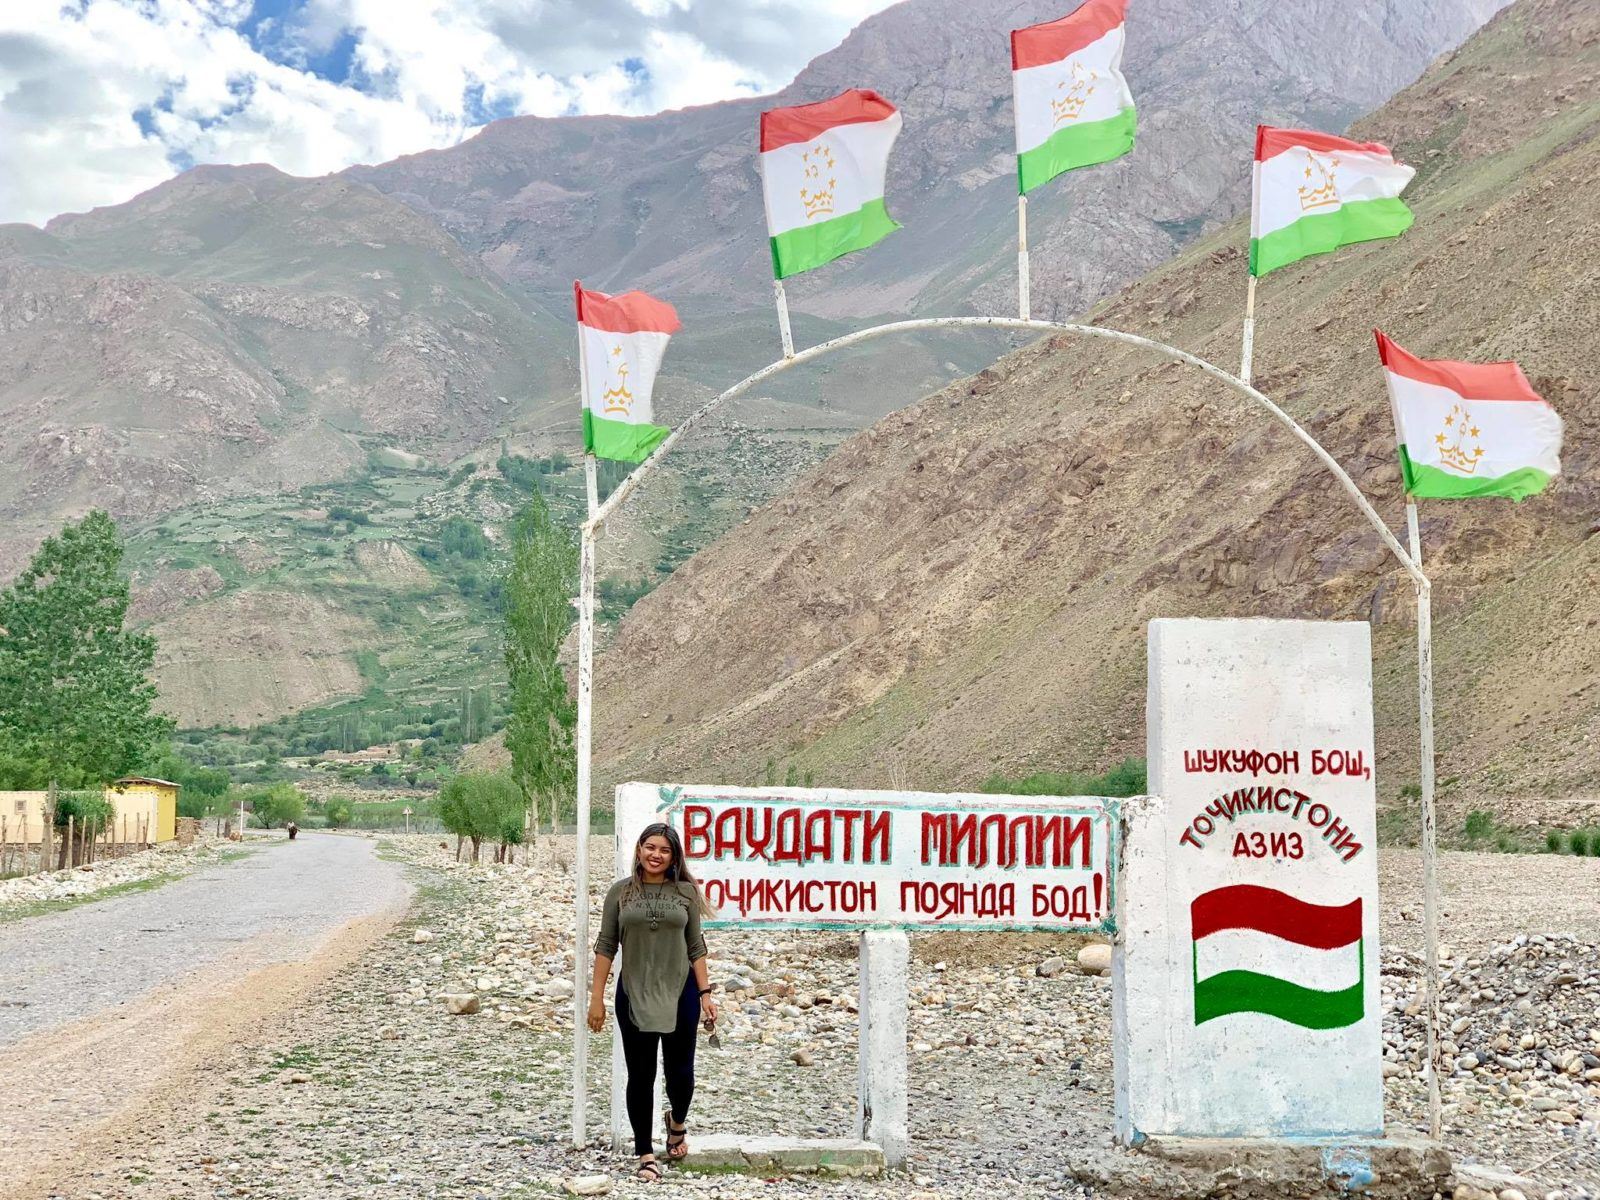 13 Things You Should Not Miss When You Travel the Pamir Highway in Tajikistan2